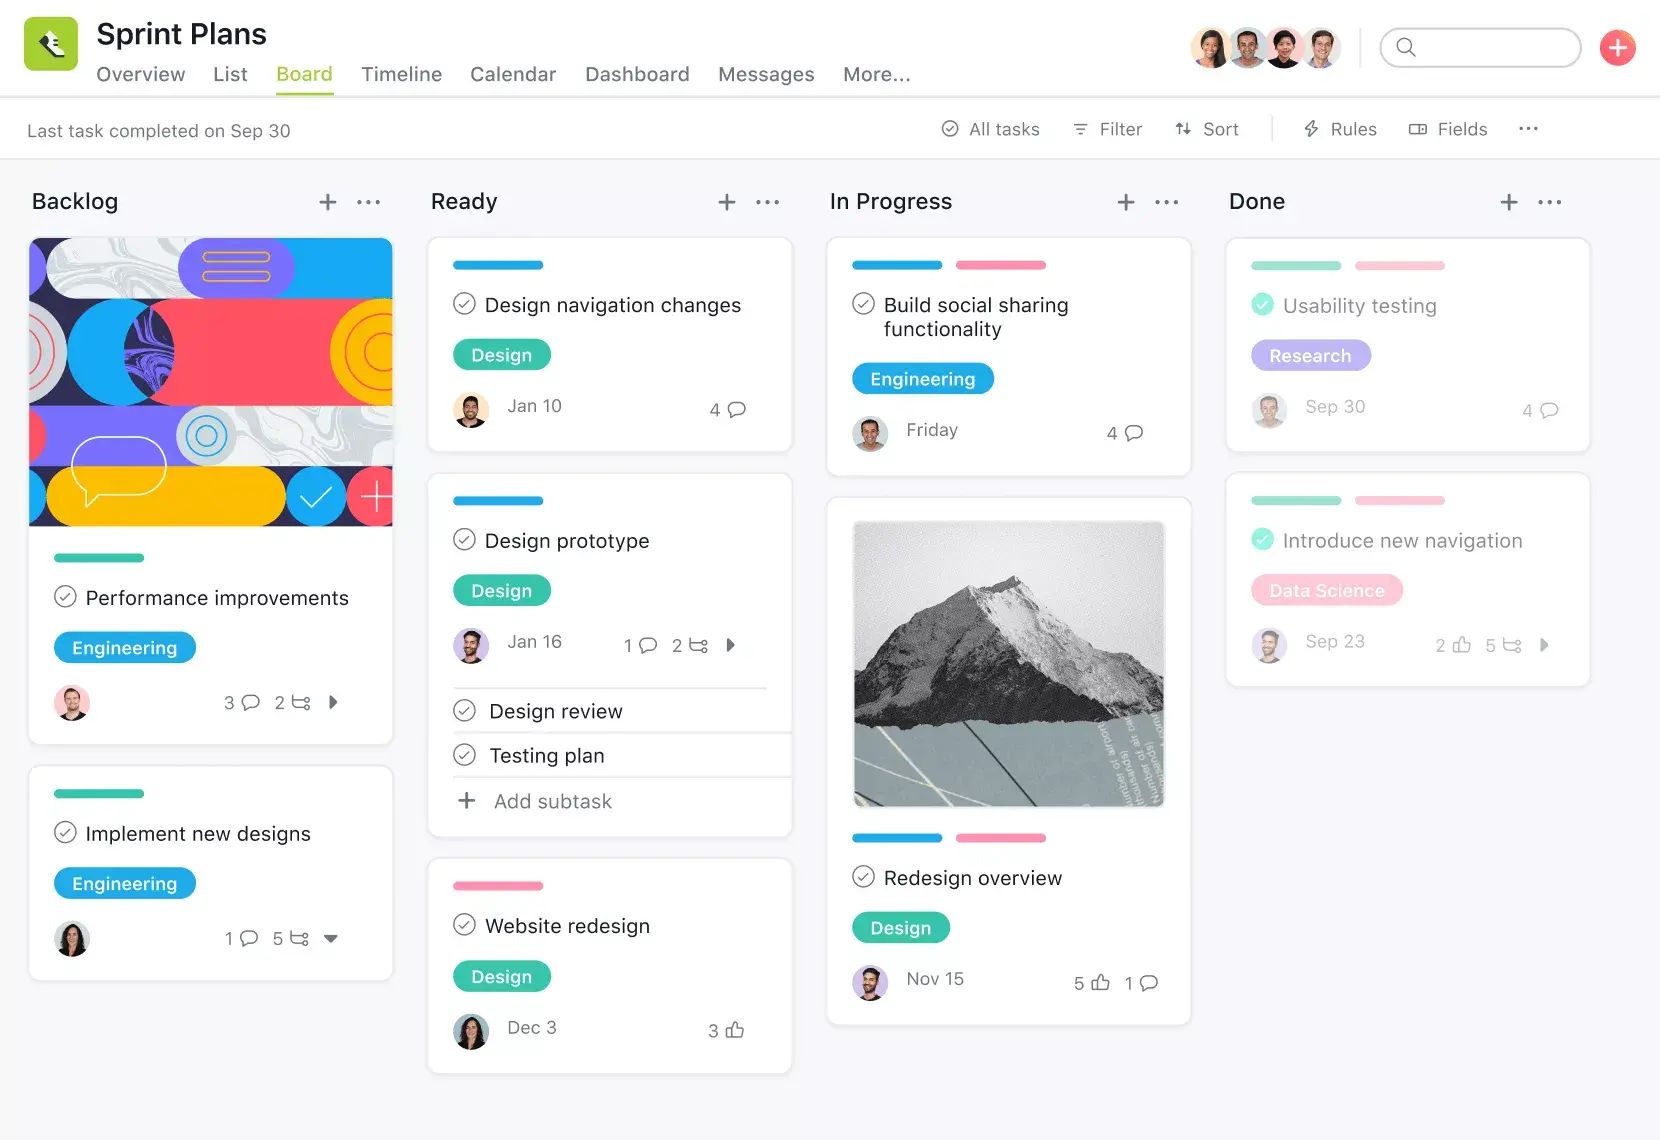 [Product UI] Sprint plans project in Asana (Boards)